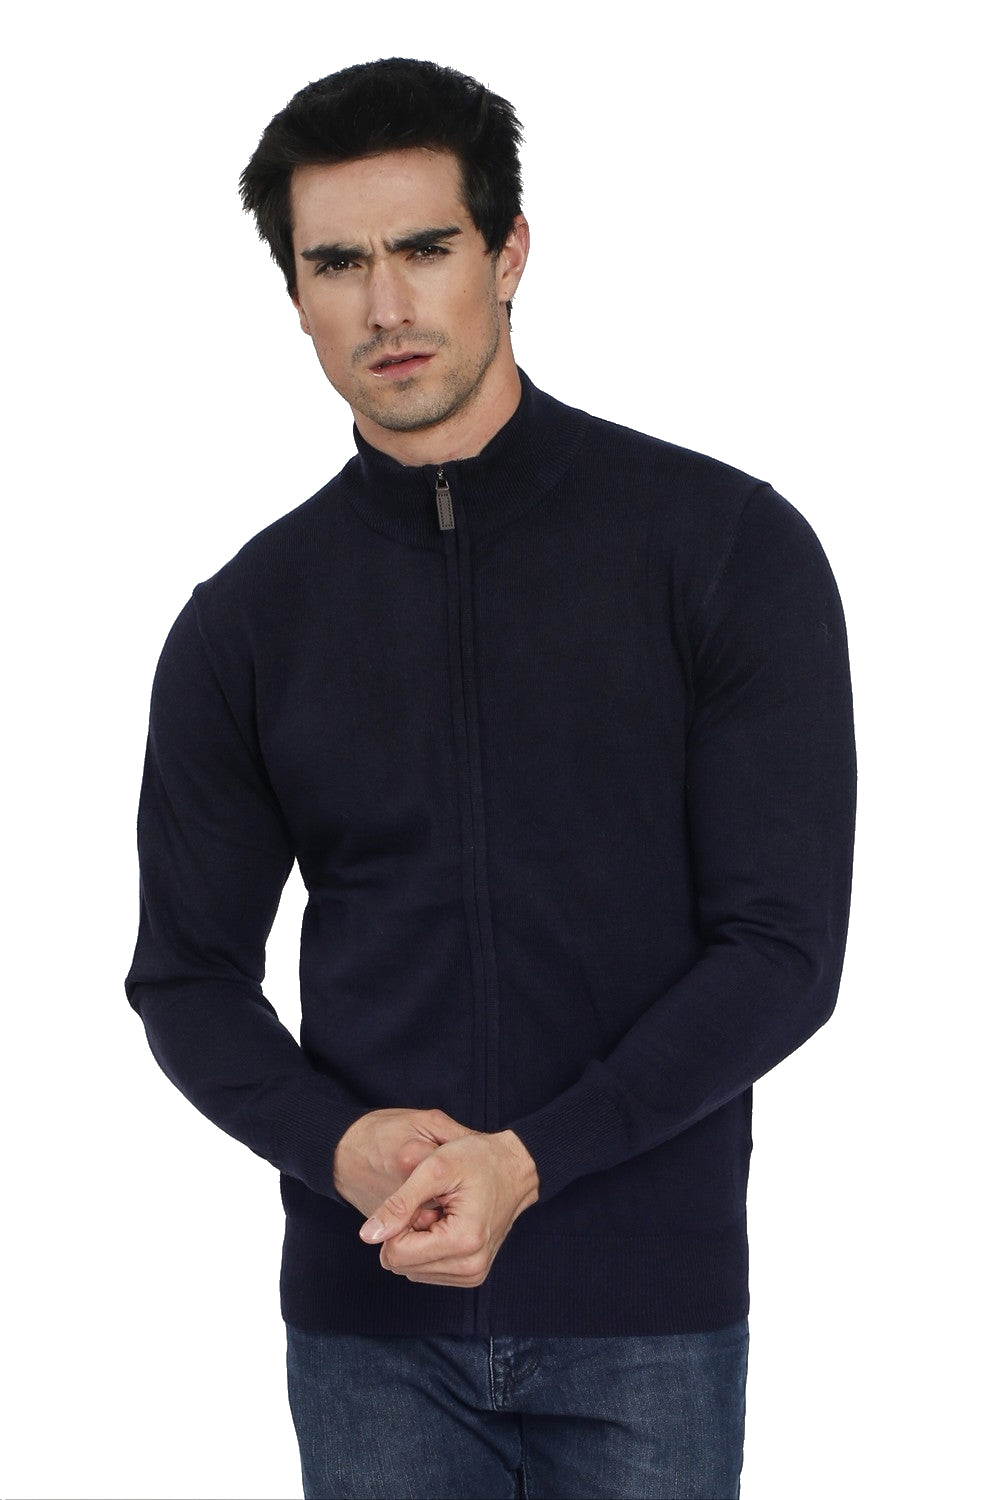 Zipped cardigan and two-color inside collar